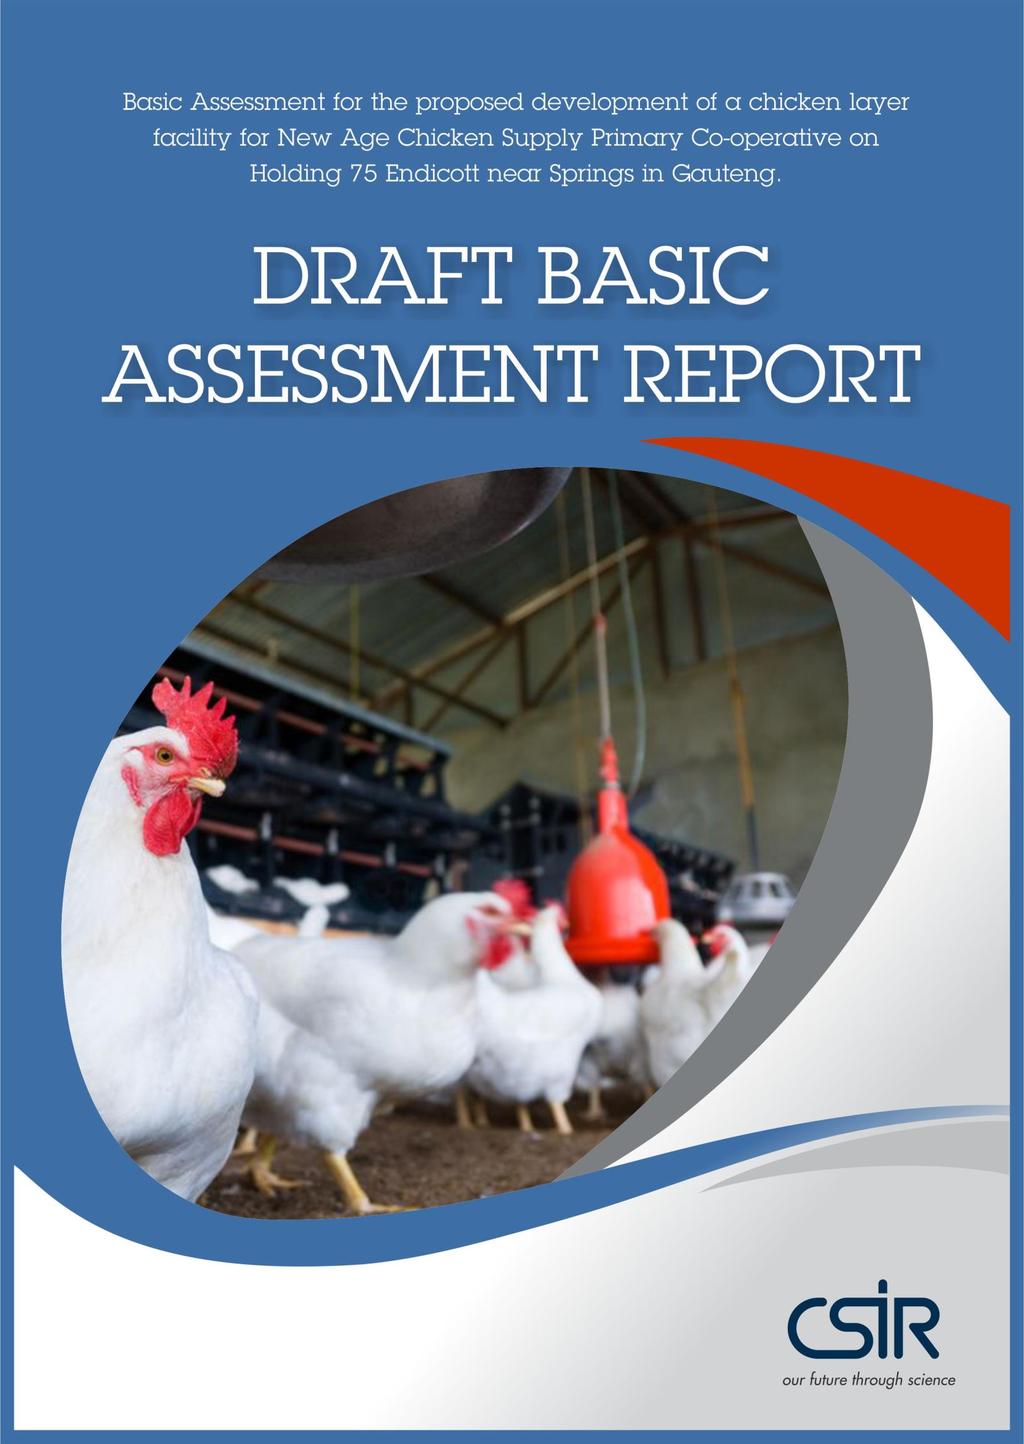 D R A F T B A S I C A S S E S S M E N T R E P O R T Basic Assessment for the proposed development of a chicken